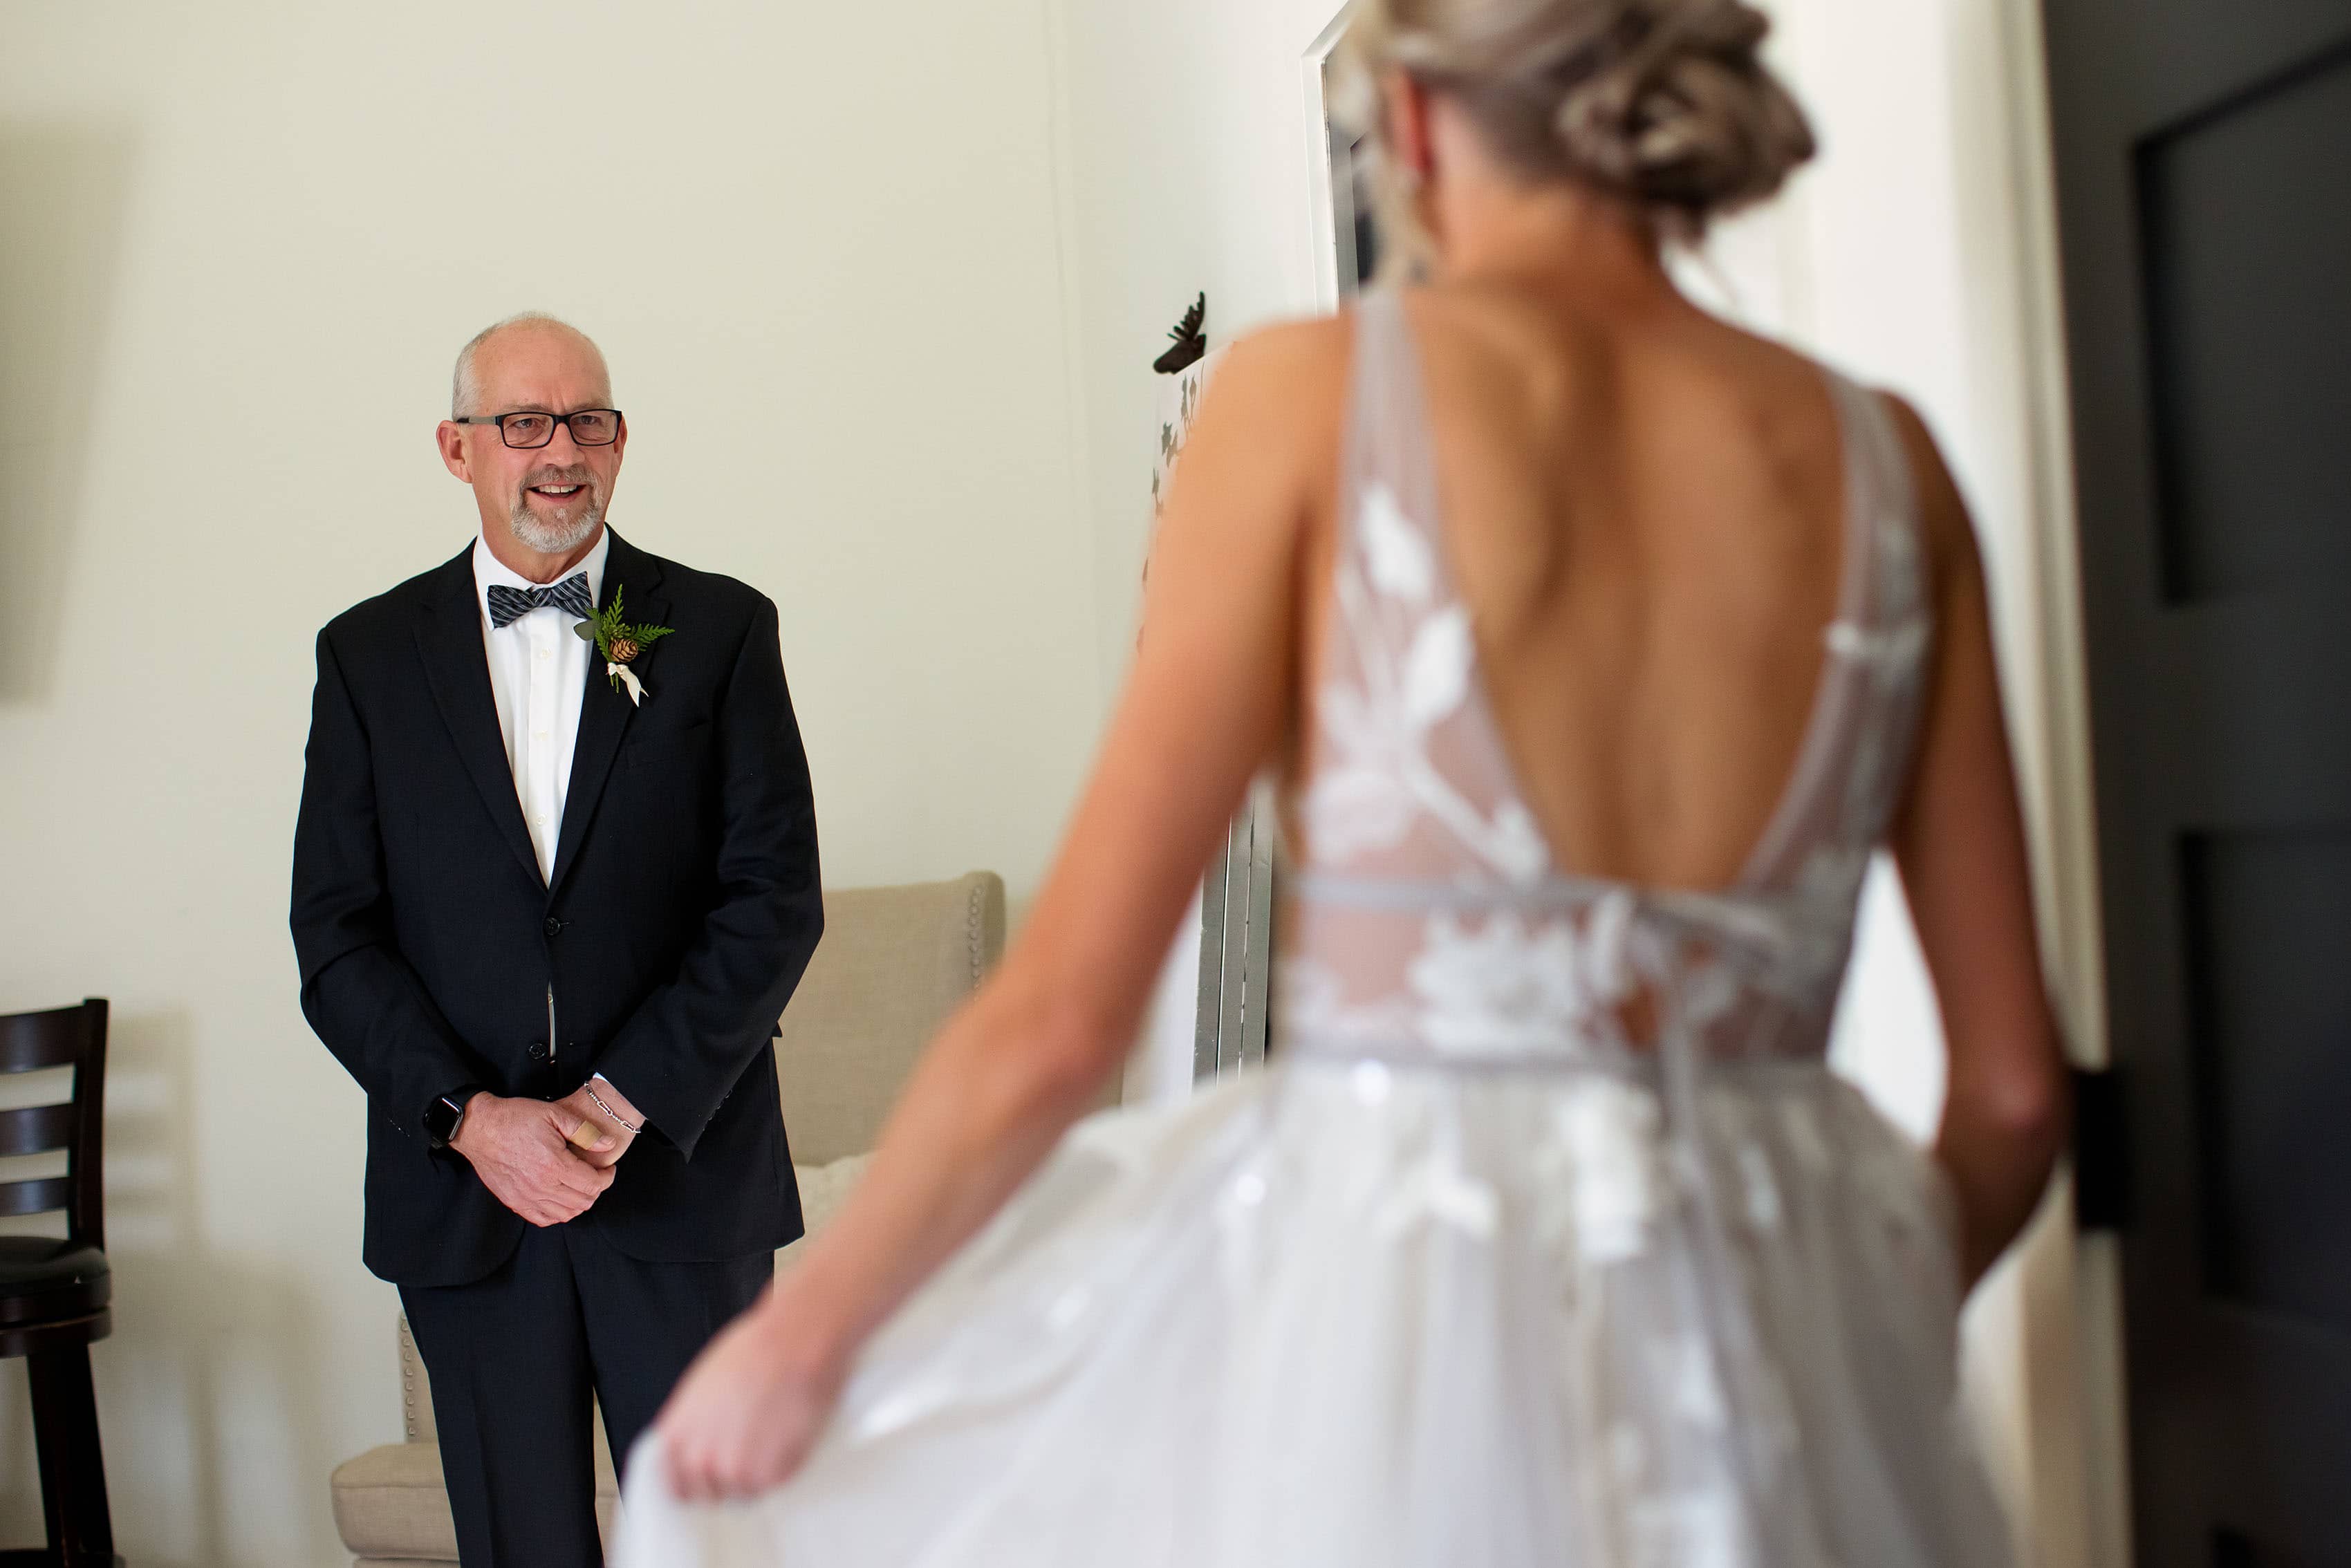 The father of the bride sees her in her dress for the first time